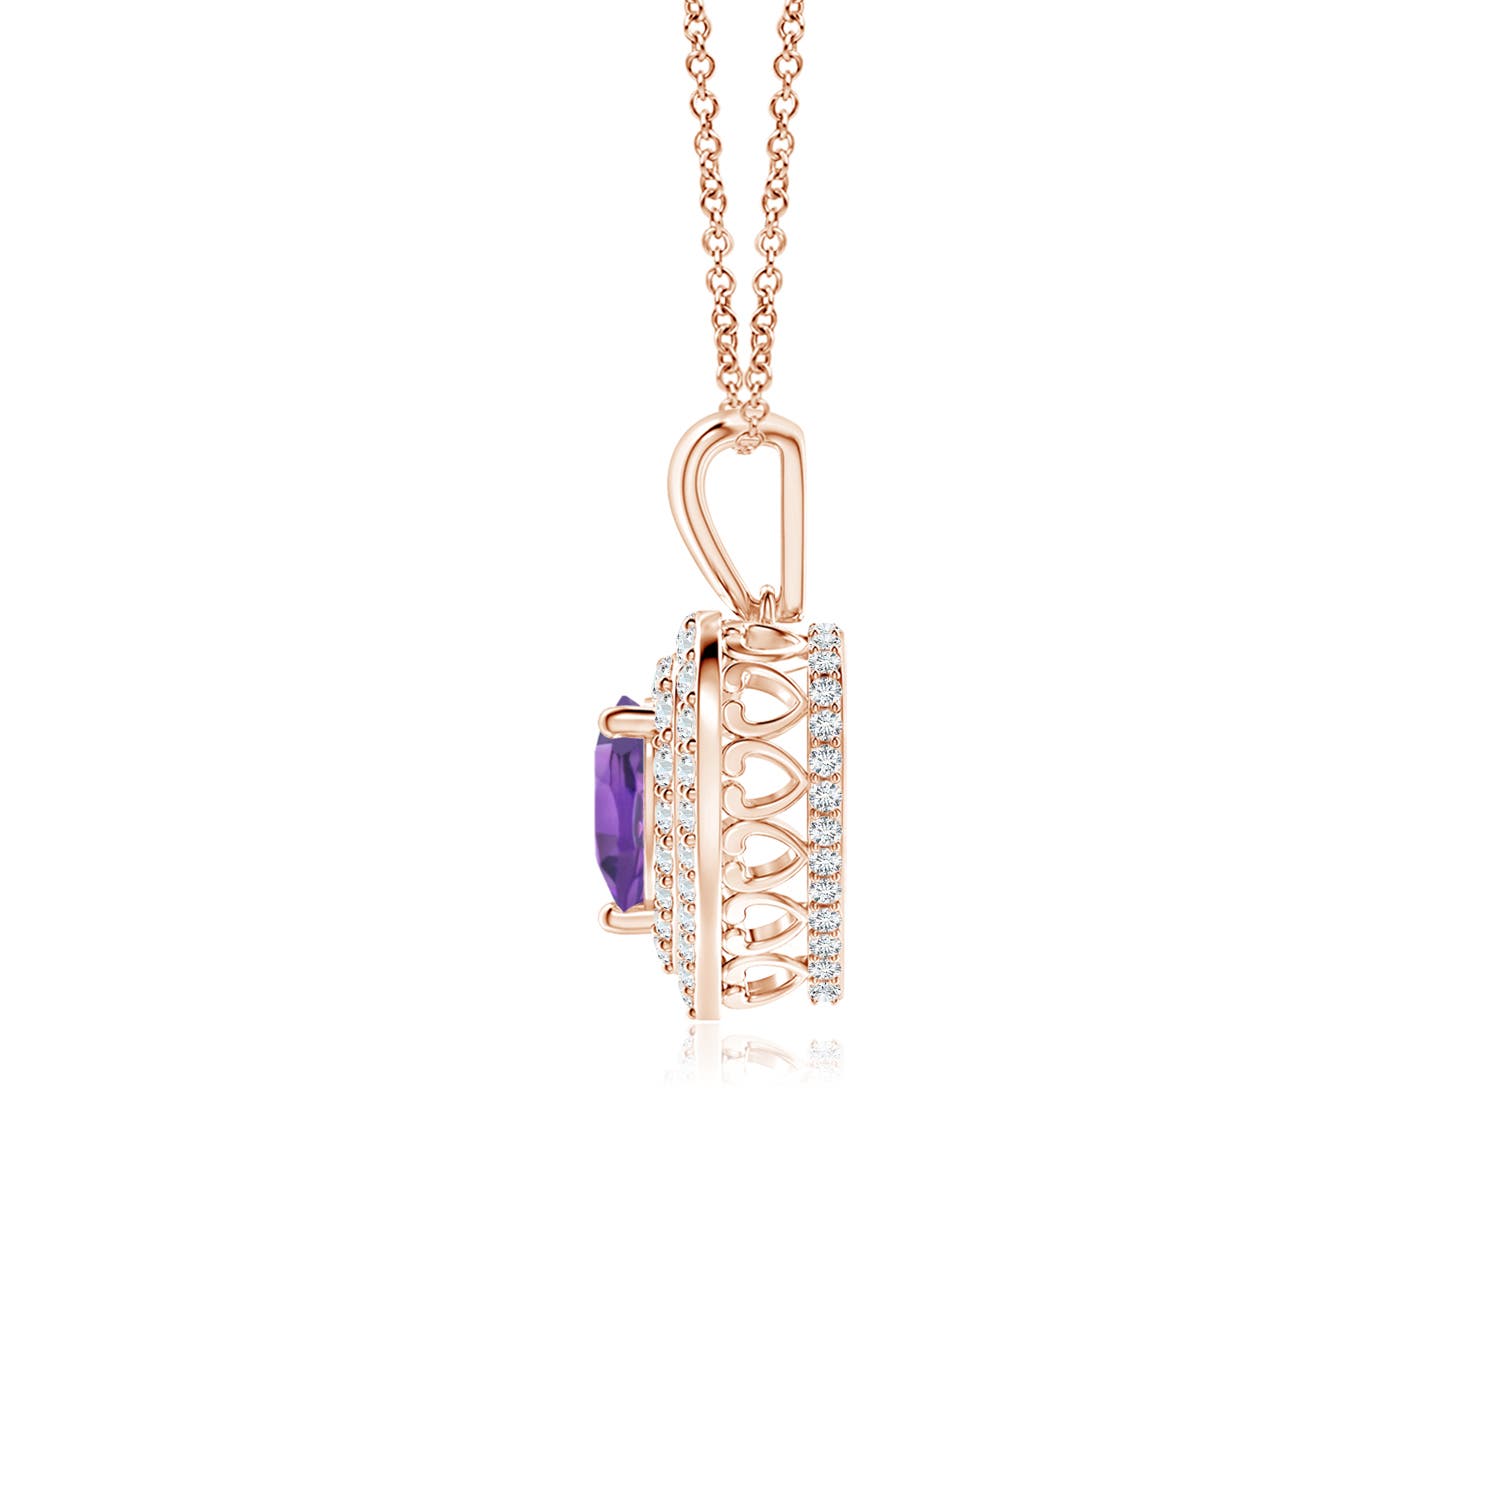 AA - Amethyst / 0.74 CT / 14 KT Rose Gold